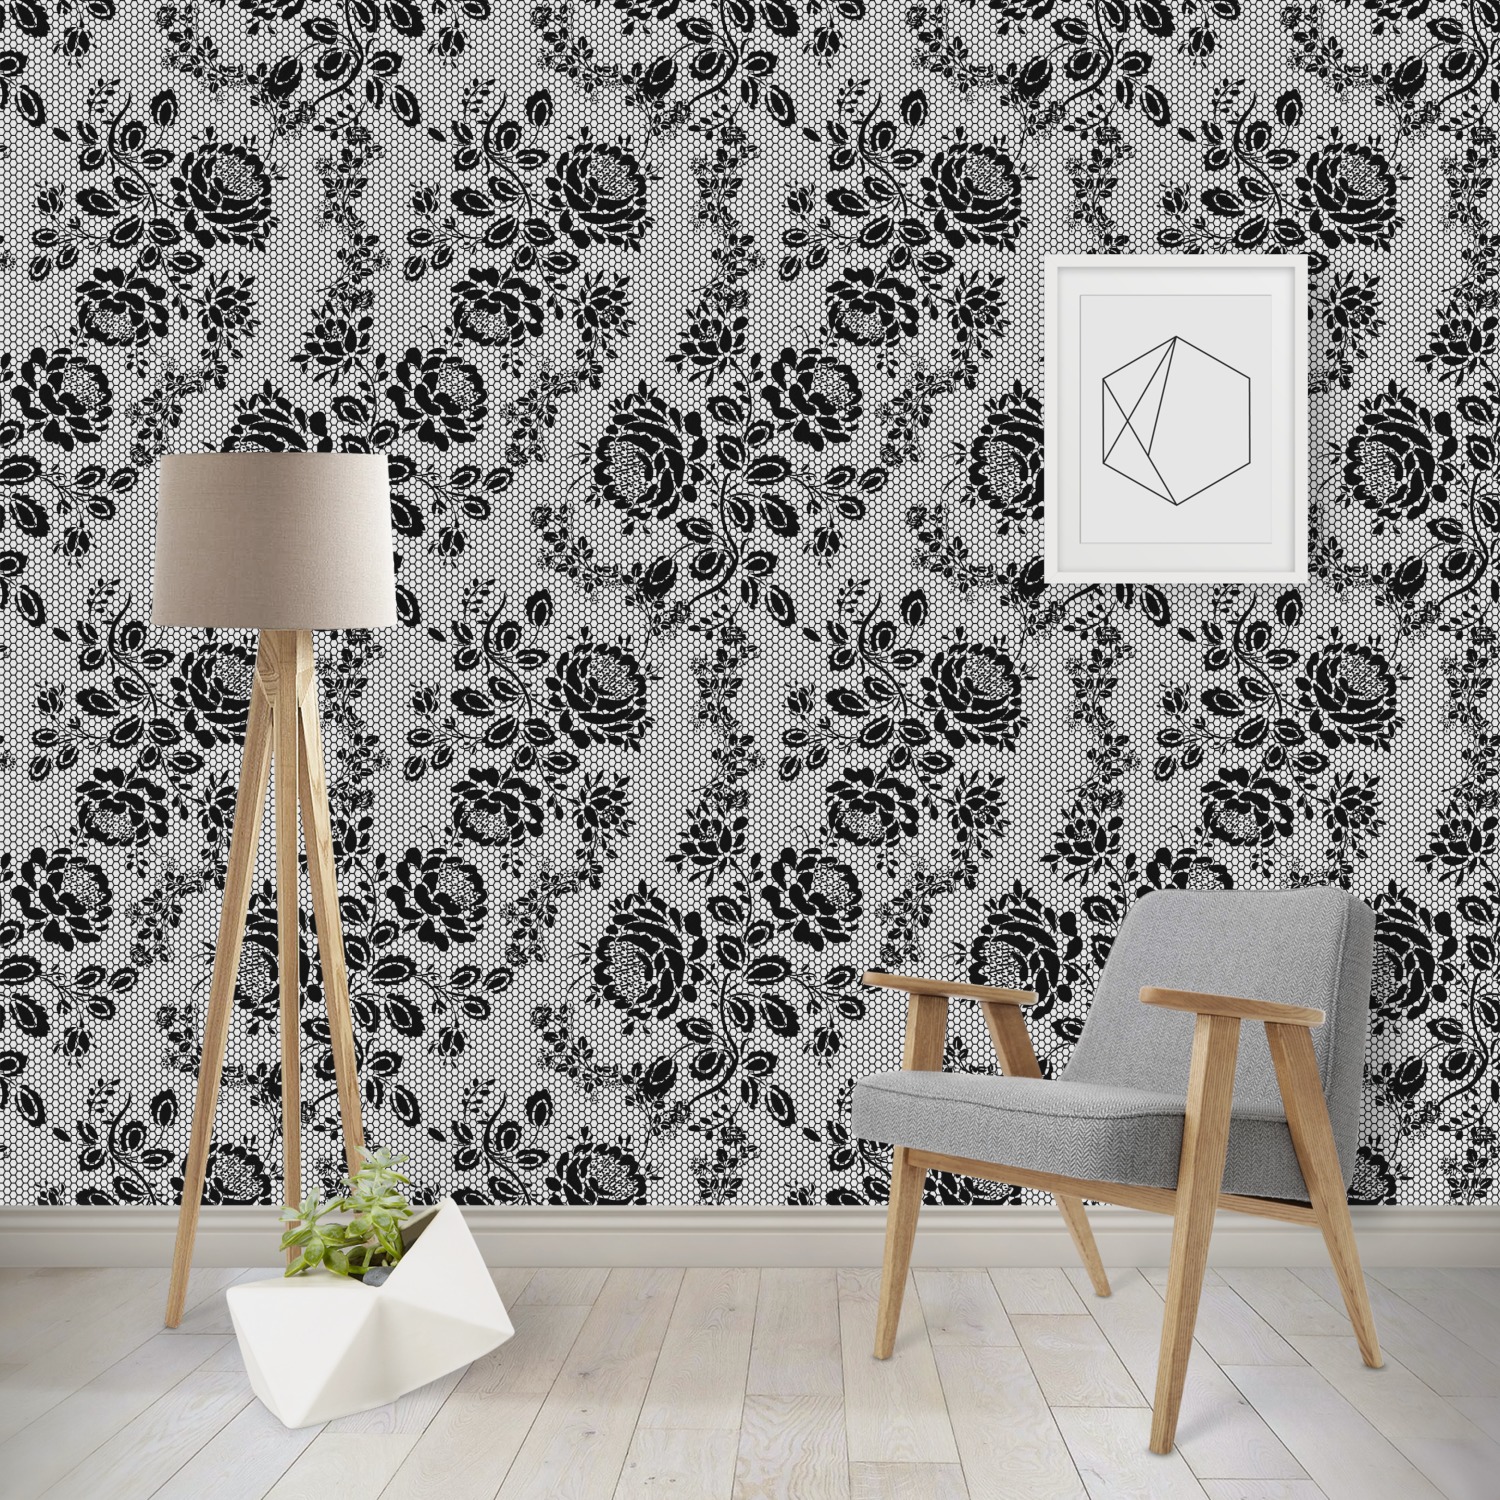 Black Lace Wallpaper & Surface Covering - YouCustomizeIt